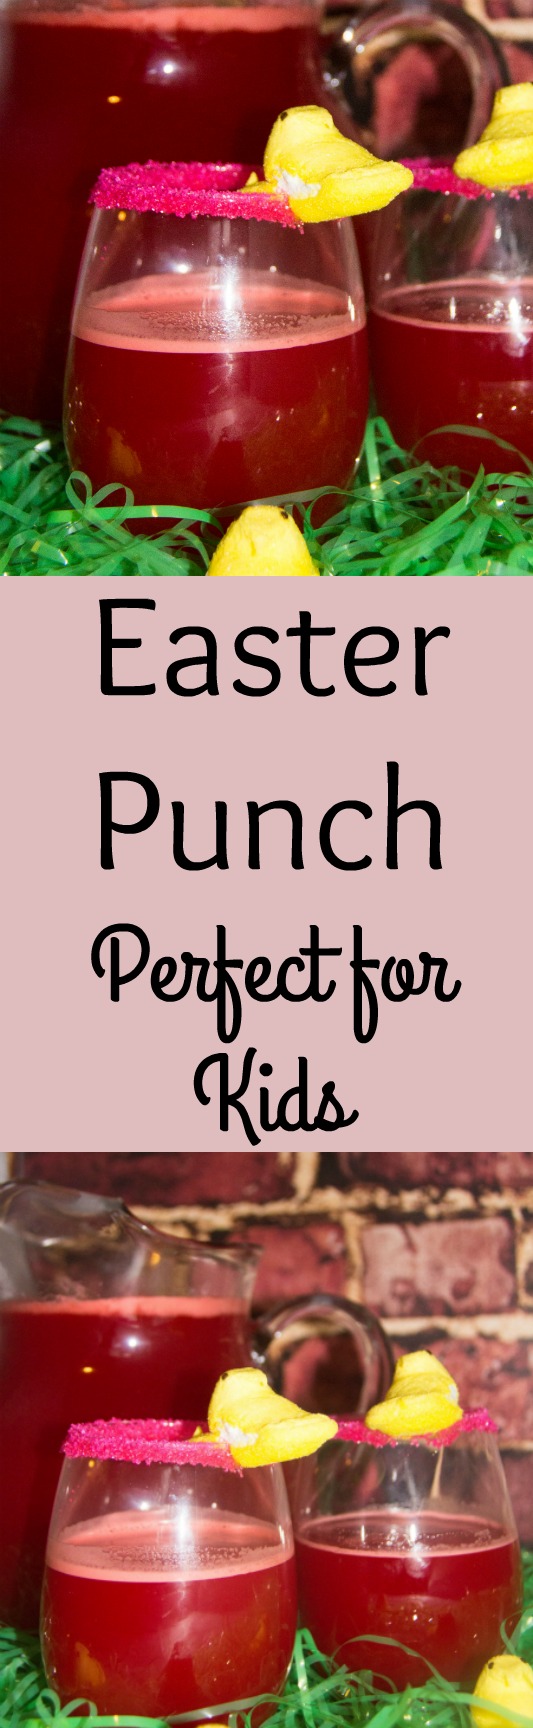 Whether you are looking for an Easter Punch recipe or a non-alcoholic punch recipe for anytime, this is an easy to make to make punch recipe for kids.